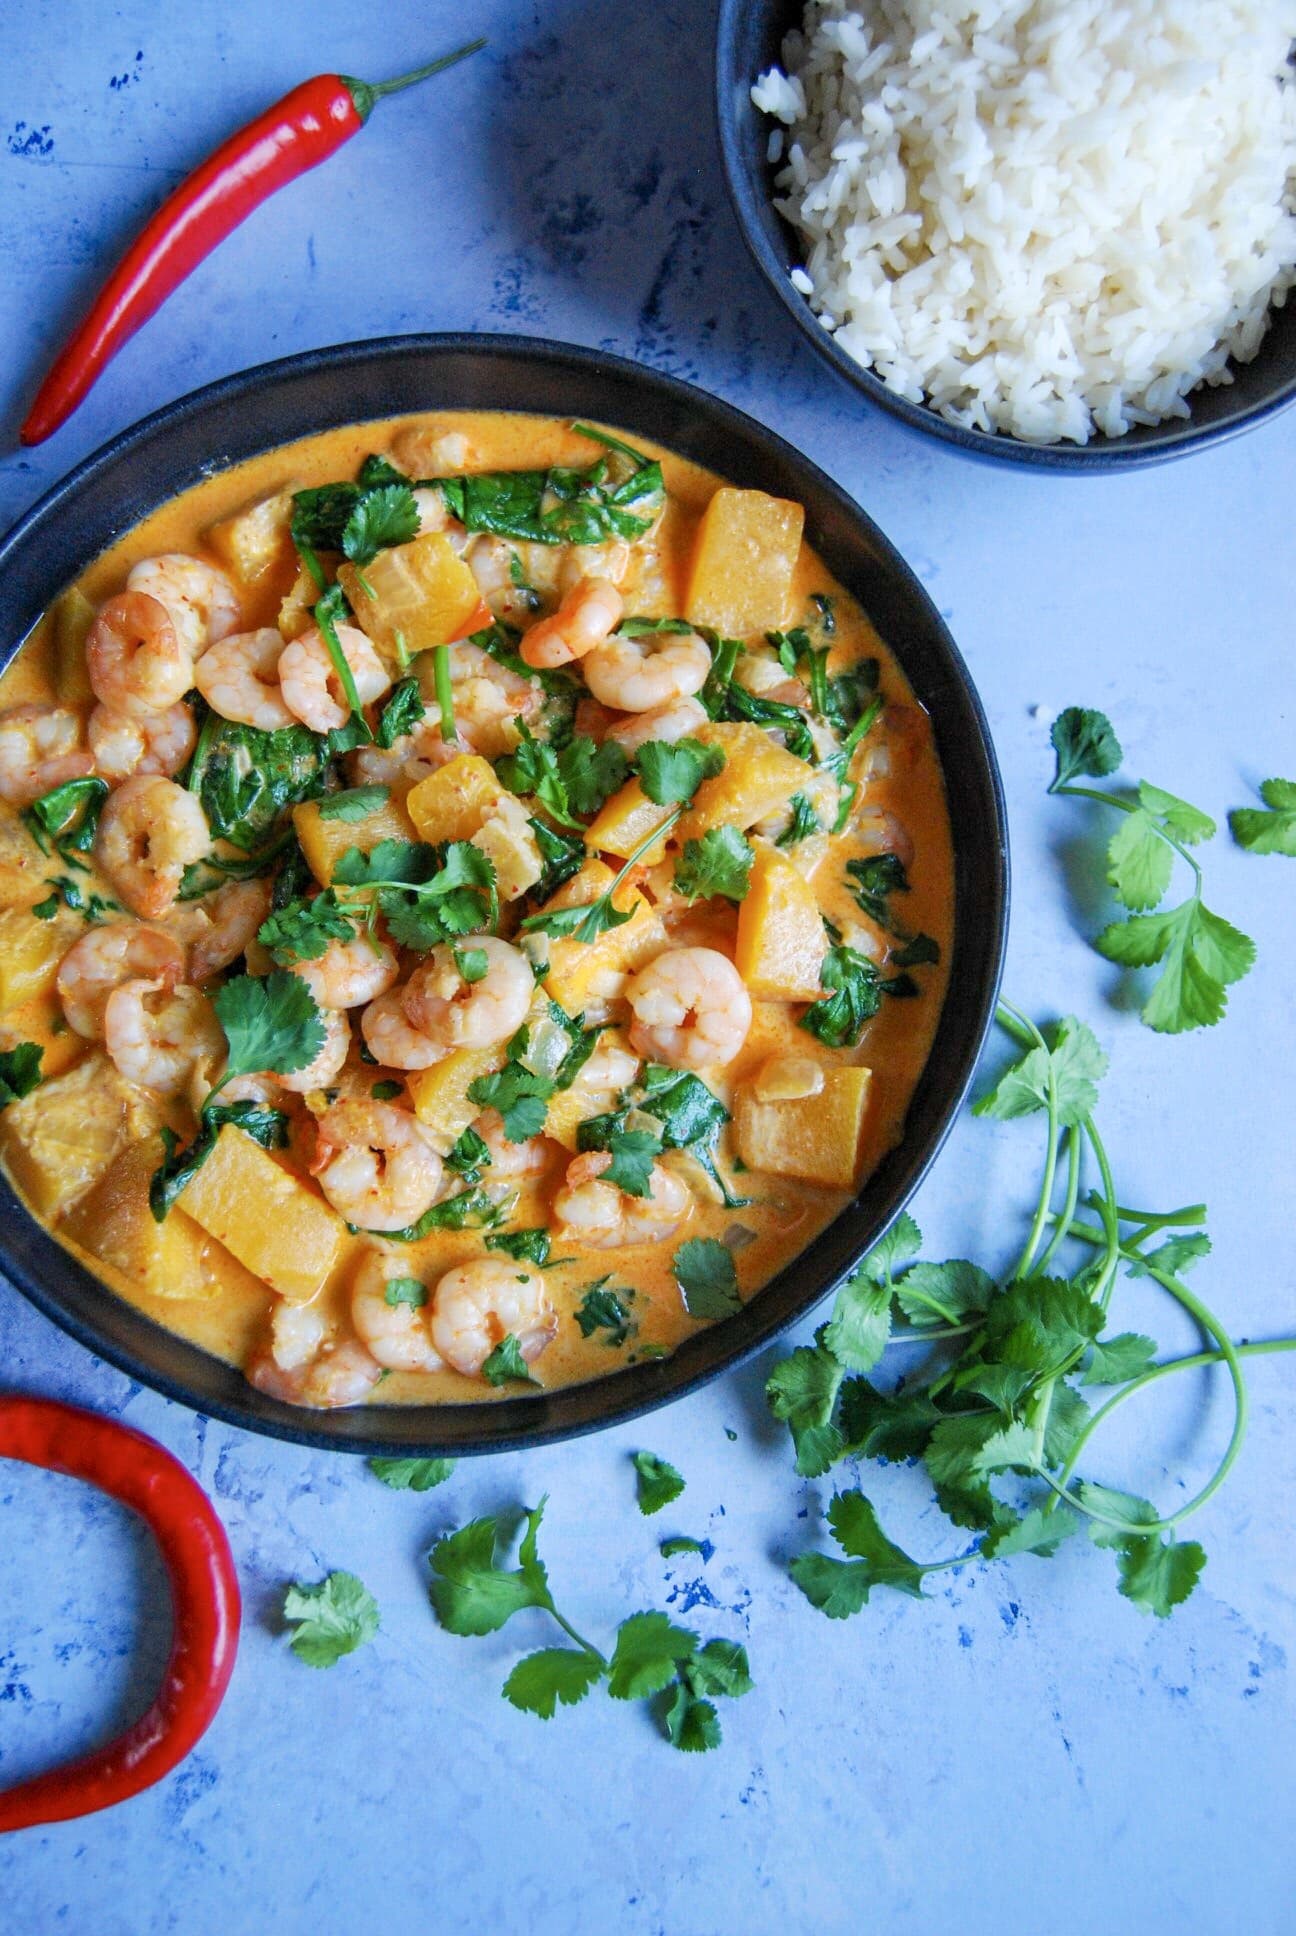 A flay lay photo - blue background with a bowl of prawn red Thai curry sprinkled with fresh chopped coriander. A bowl of rice can be seen in the top right hand corner and red chillies and coriander sprigs are placed around the bowls.